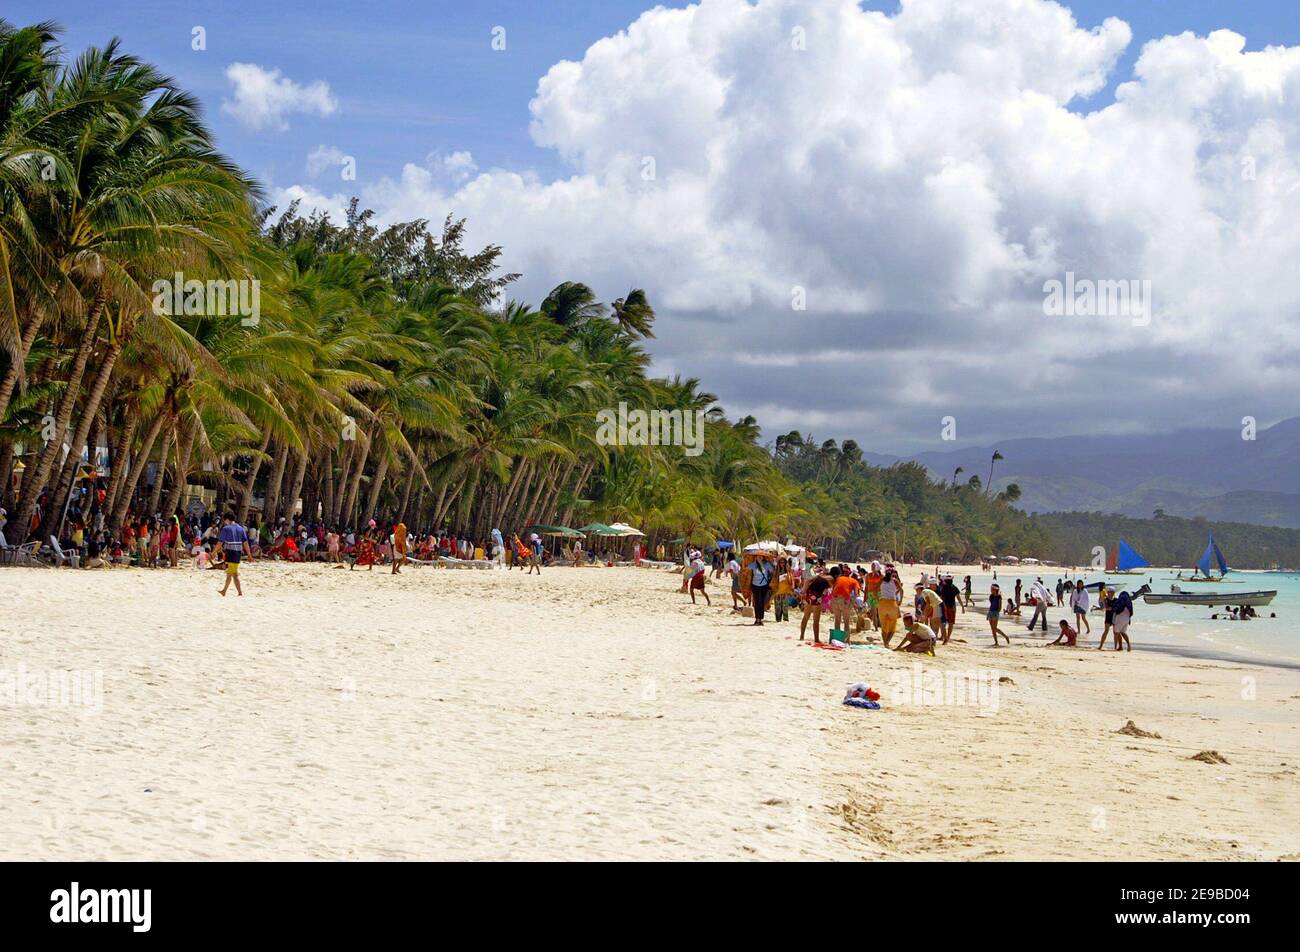 Tourists enjoy White Beach on the tropical island of Boracay in the Western Visayas of the Philippines.  Taken in 2005, the issue of carrying capacity and tourism impacts were starting to appear.  Thirteen years later, in 2018, the entire island was closed by the government so that it could be rehabilitated and redeveloped in a more sustainable way.  The six month closure was followed by a slow phased in opening thereafter. Stock Photo